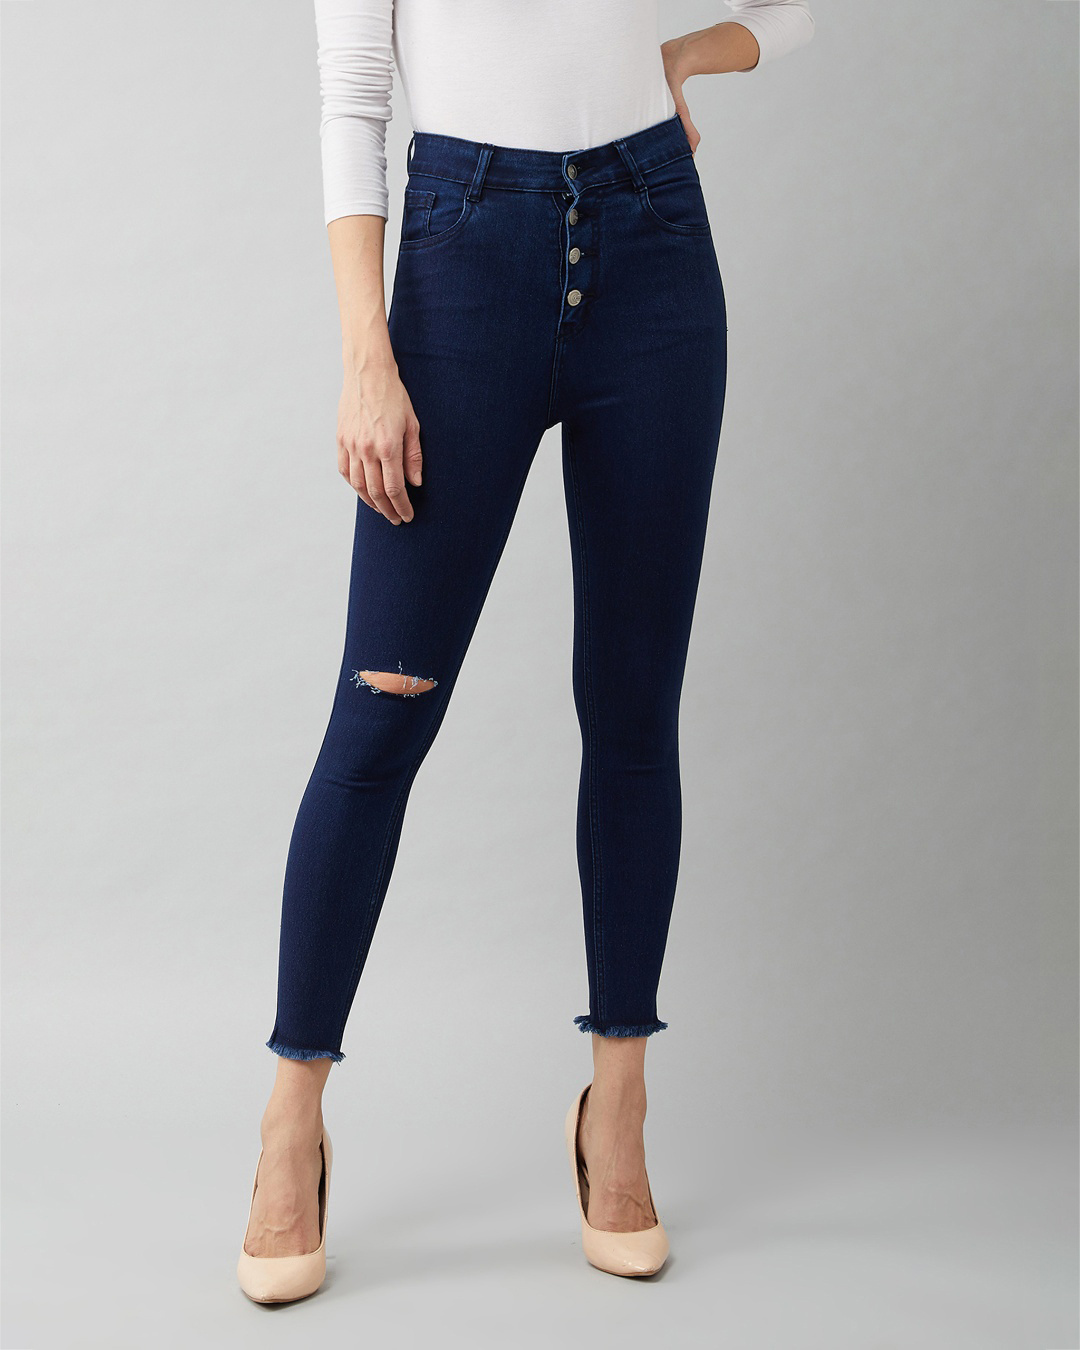 Buy DOLCE CRUDO Connection Builds Trust Slitted Denim Jeans for Women ...